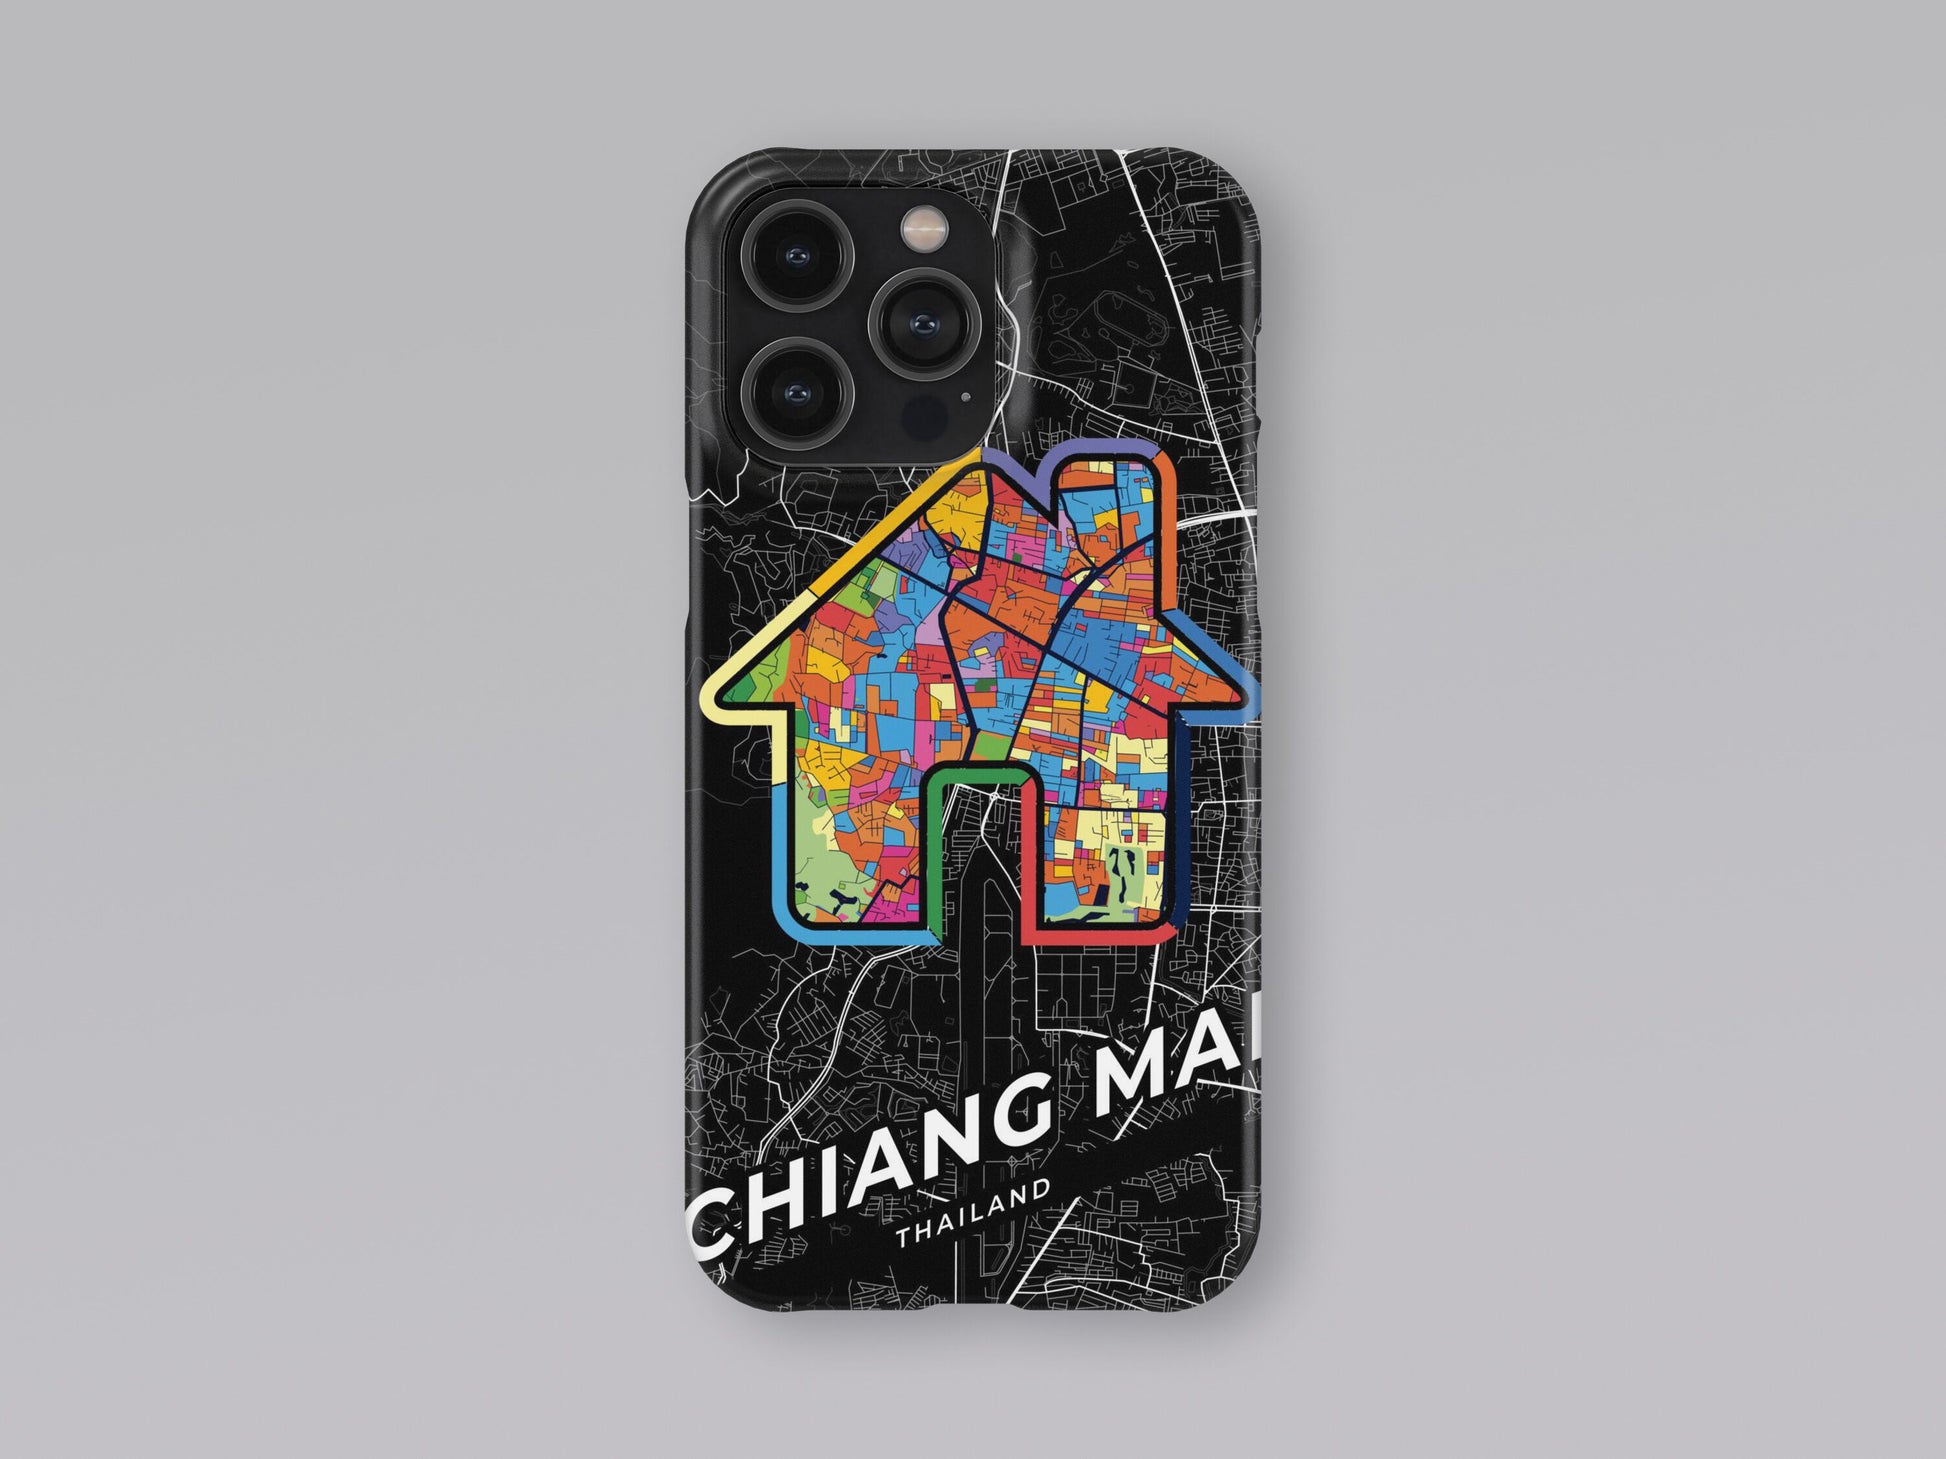 Chiang Mai Thailand slim phone case with colorful icon. Birthday, wedding or housewarming gift. Couple match cases. 3